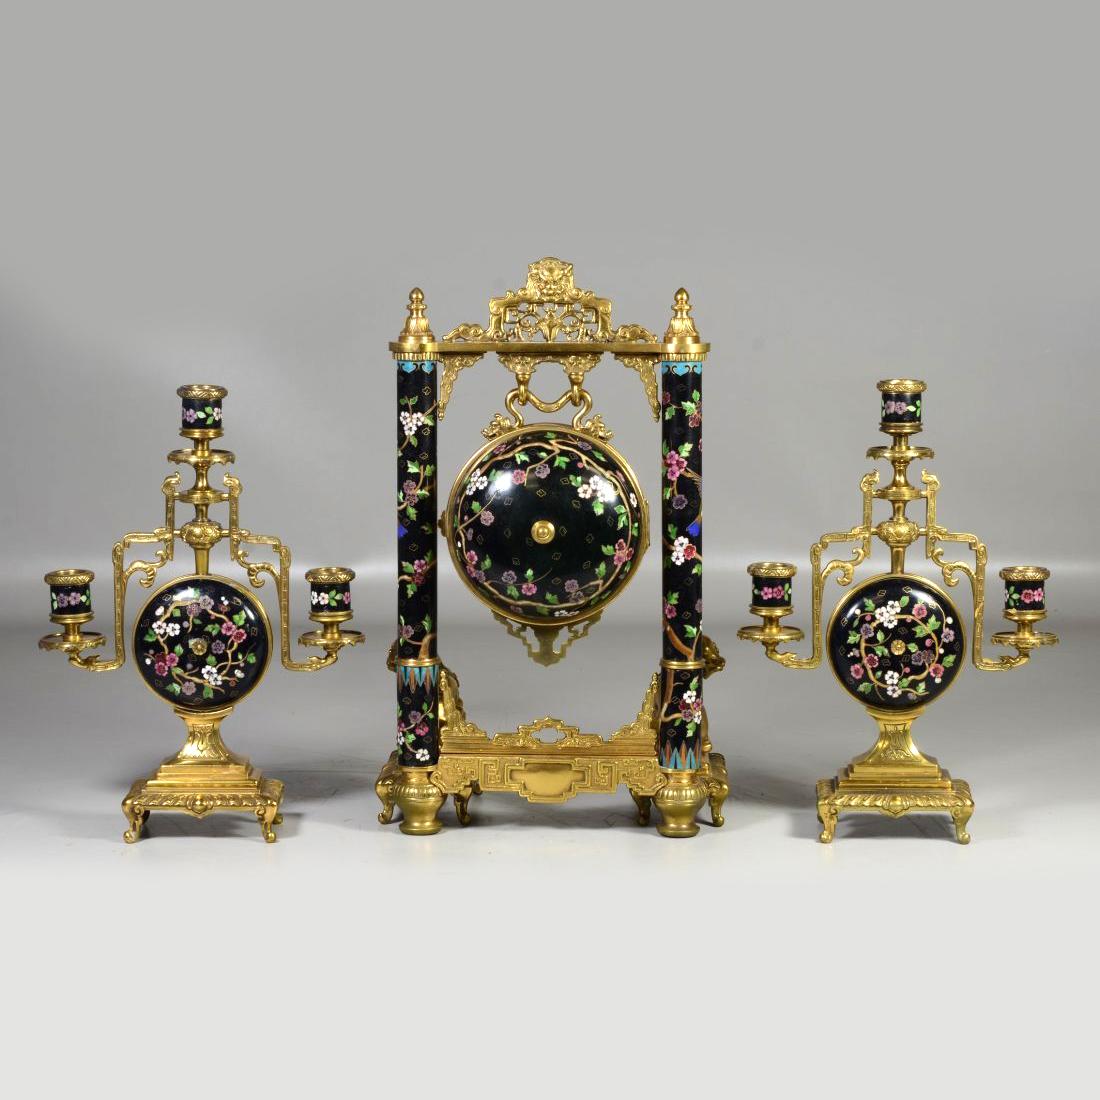 A fine chinoiserie gilt bronze and cloisonne three-piece clock set by Japy Freres.
The ball encased movement hanging as a gong from a frame with bronze Chinese elements and cloisonne columns, with foodog supports with a pair of matching